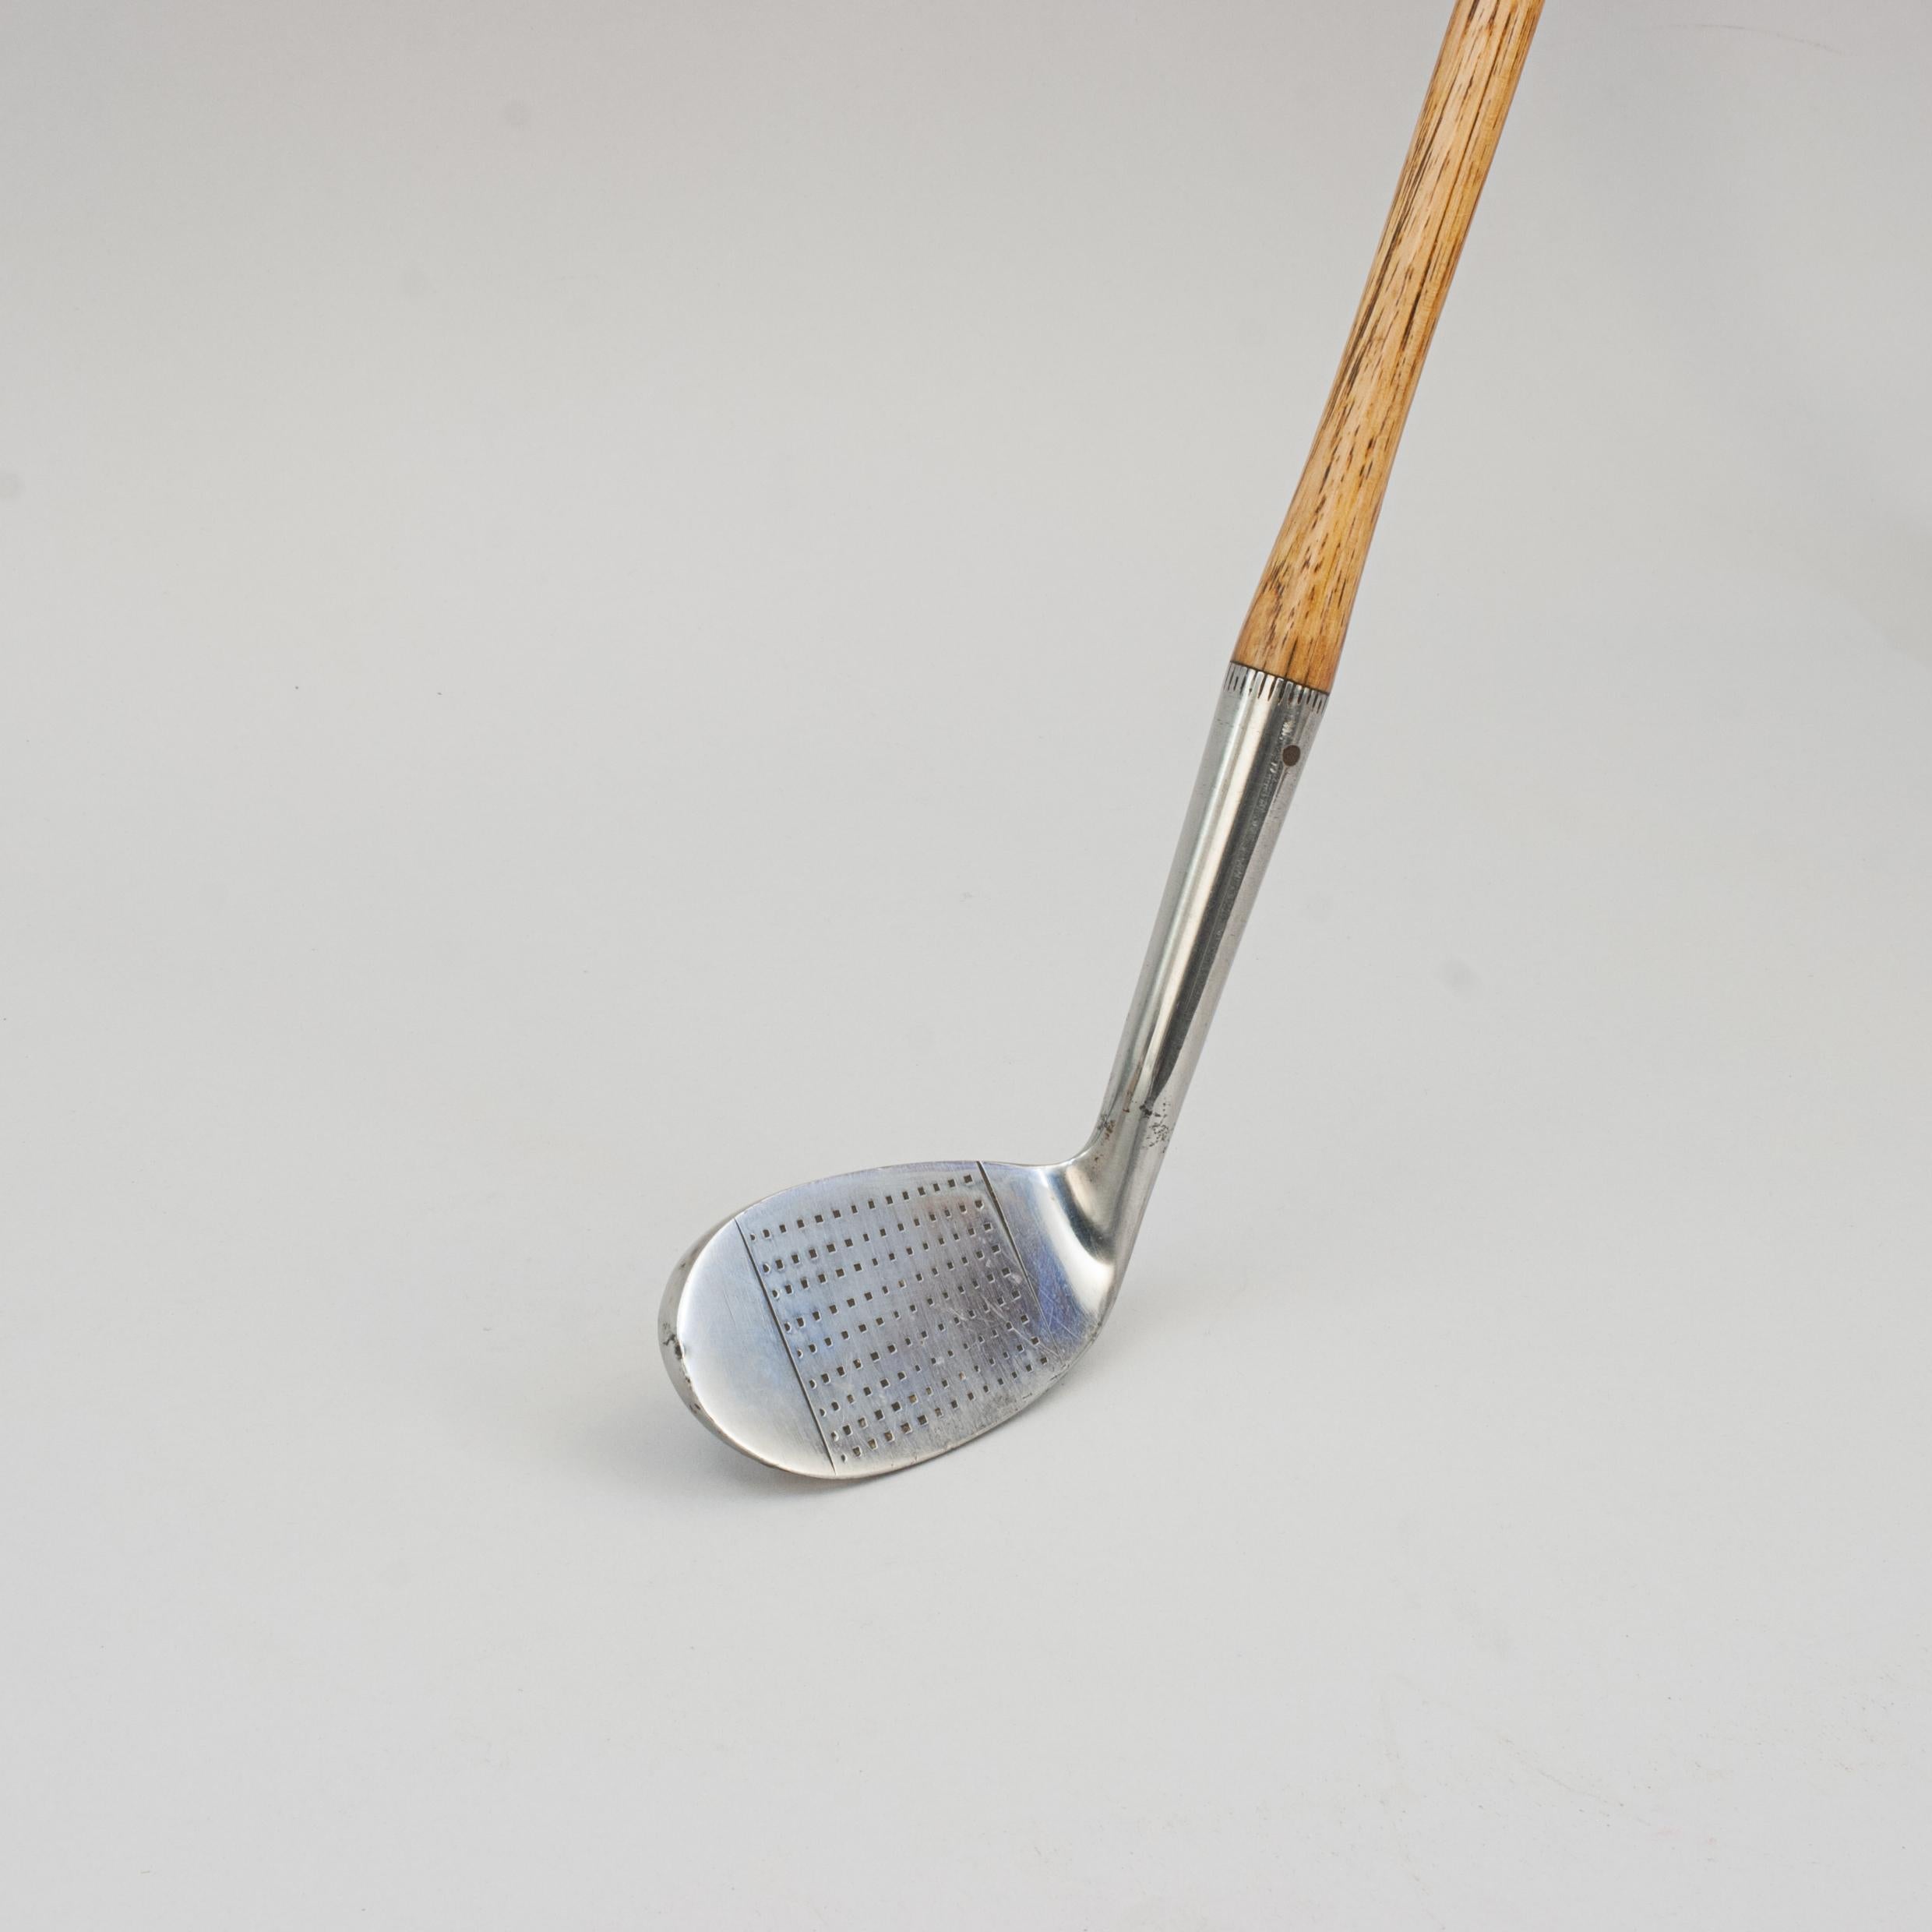 Vintage Hickory Golf Club, Powerful Mashie Niblick.
A fine and nicely weighted dot punched faced 'Powerful Mashie Niblick' by Tooley & Sons. A very unusual golf club head design with the weight at the top of the blade instead of the sole. The 'Power